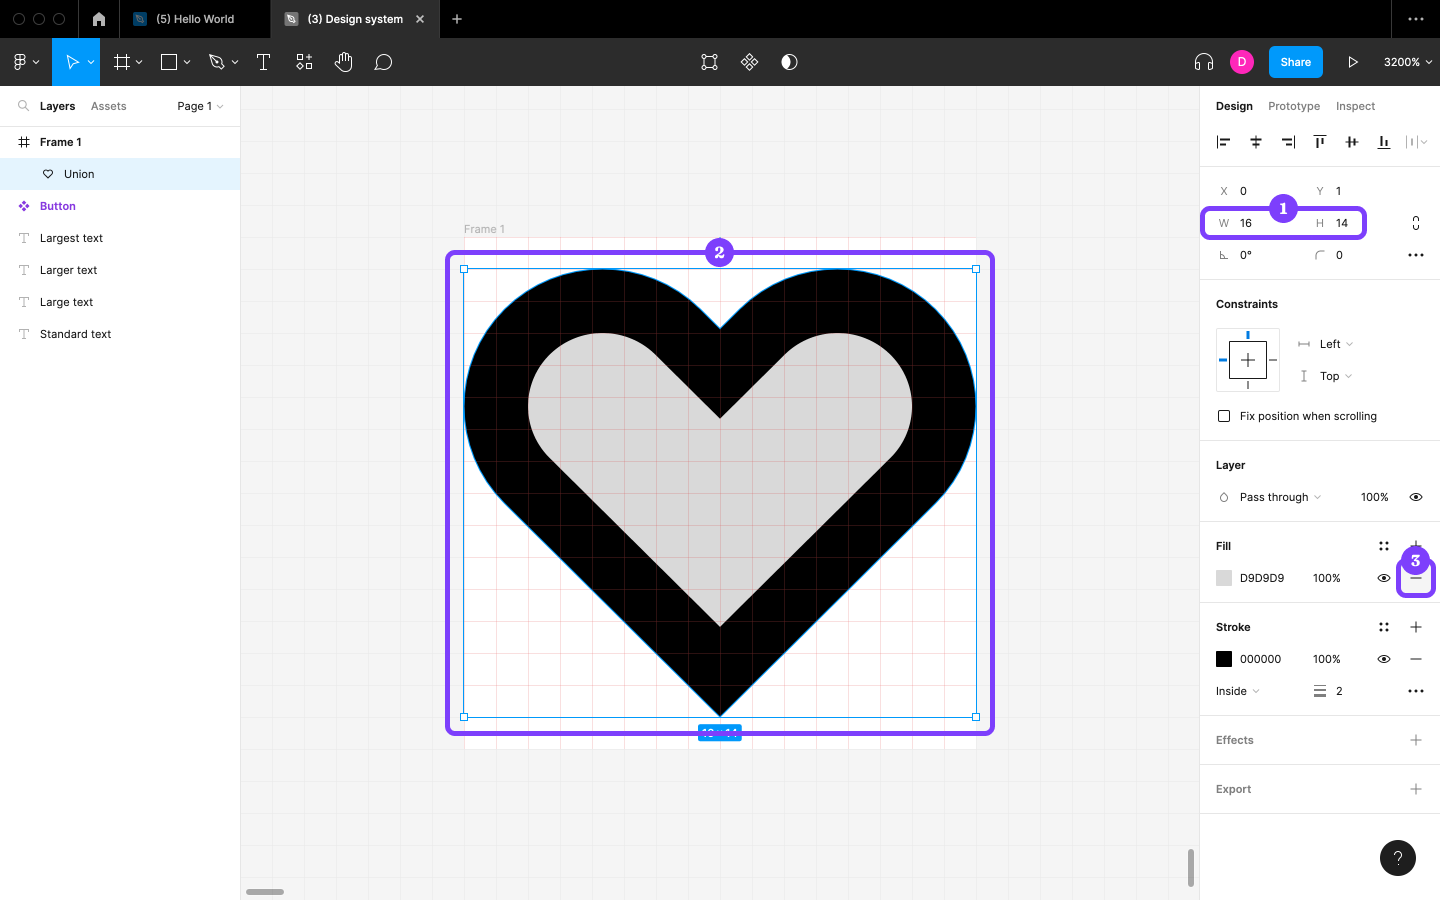 Our heart icon after the latest changes